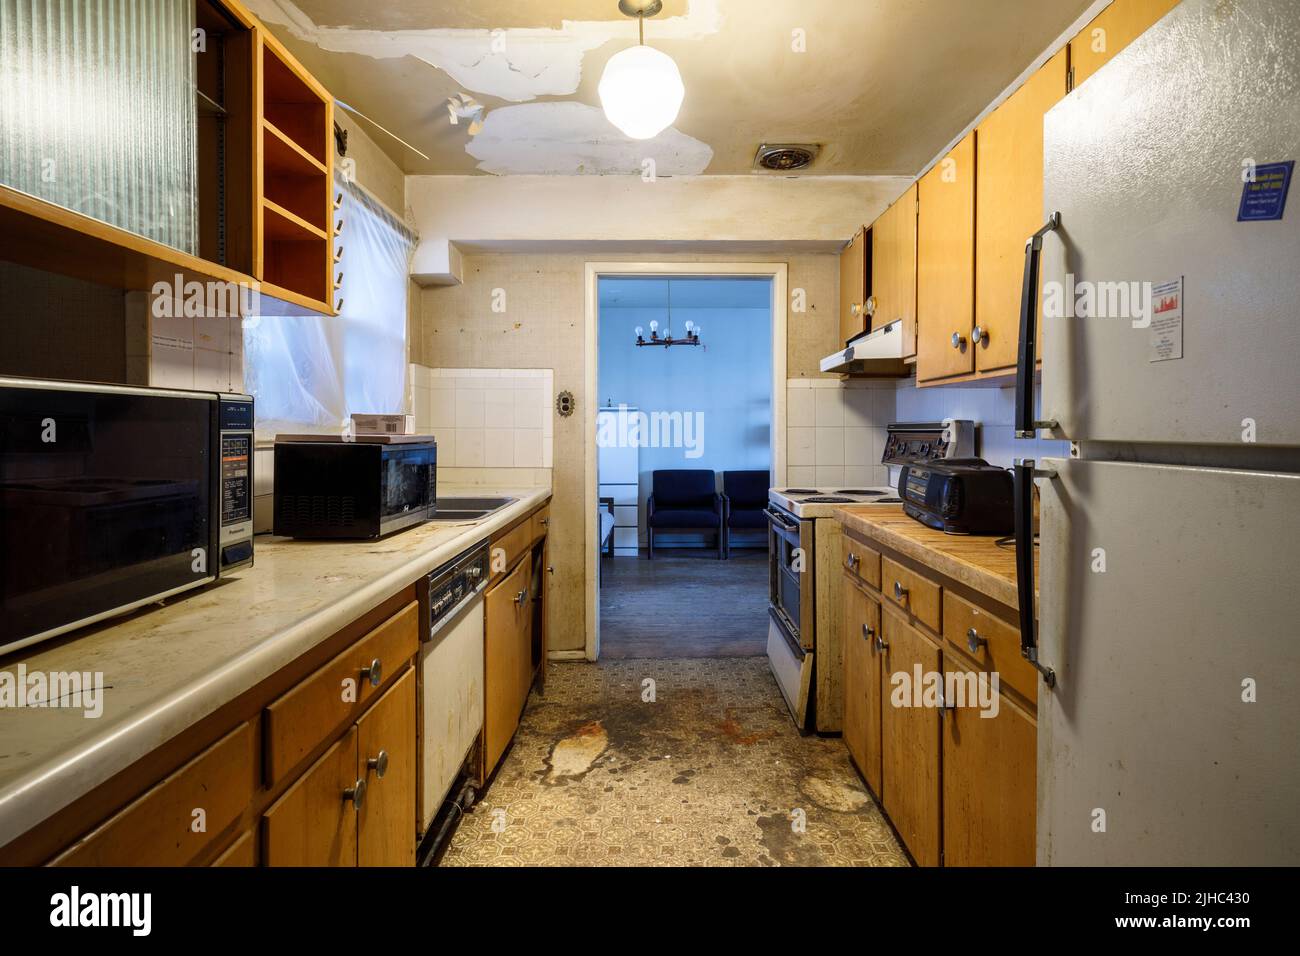 A filthy and worn 1950s kitchen. Stock Photo